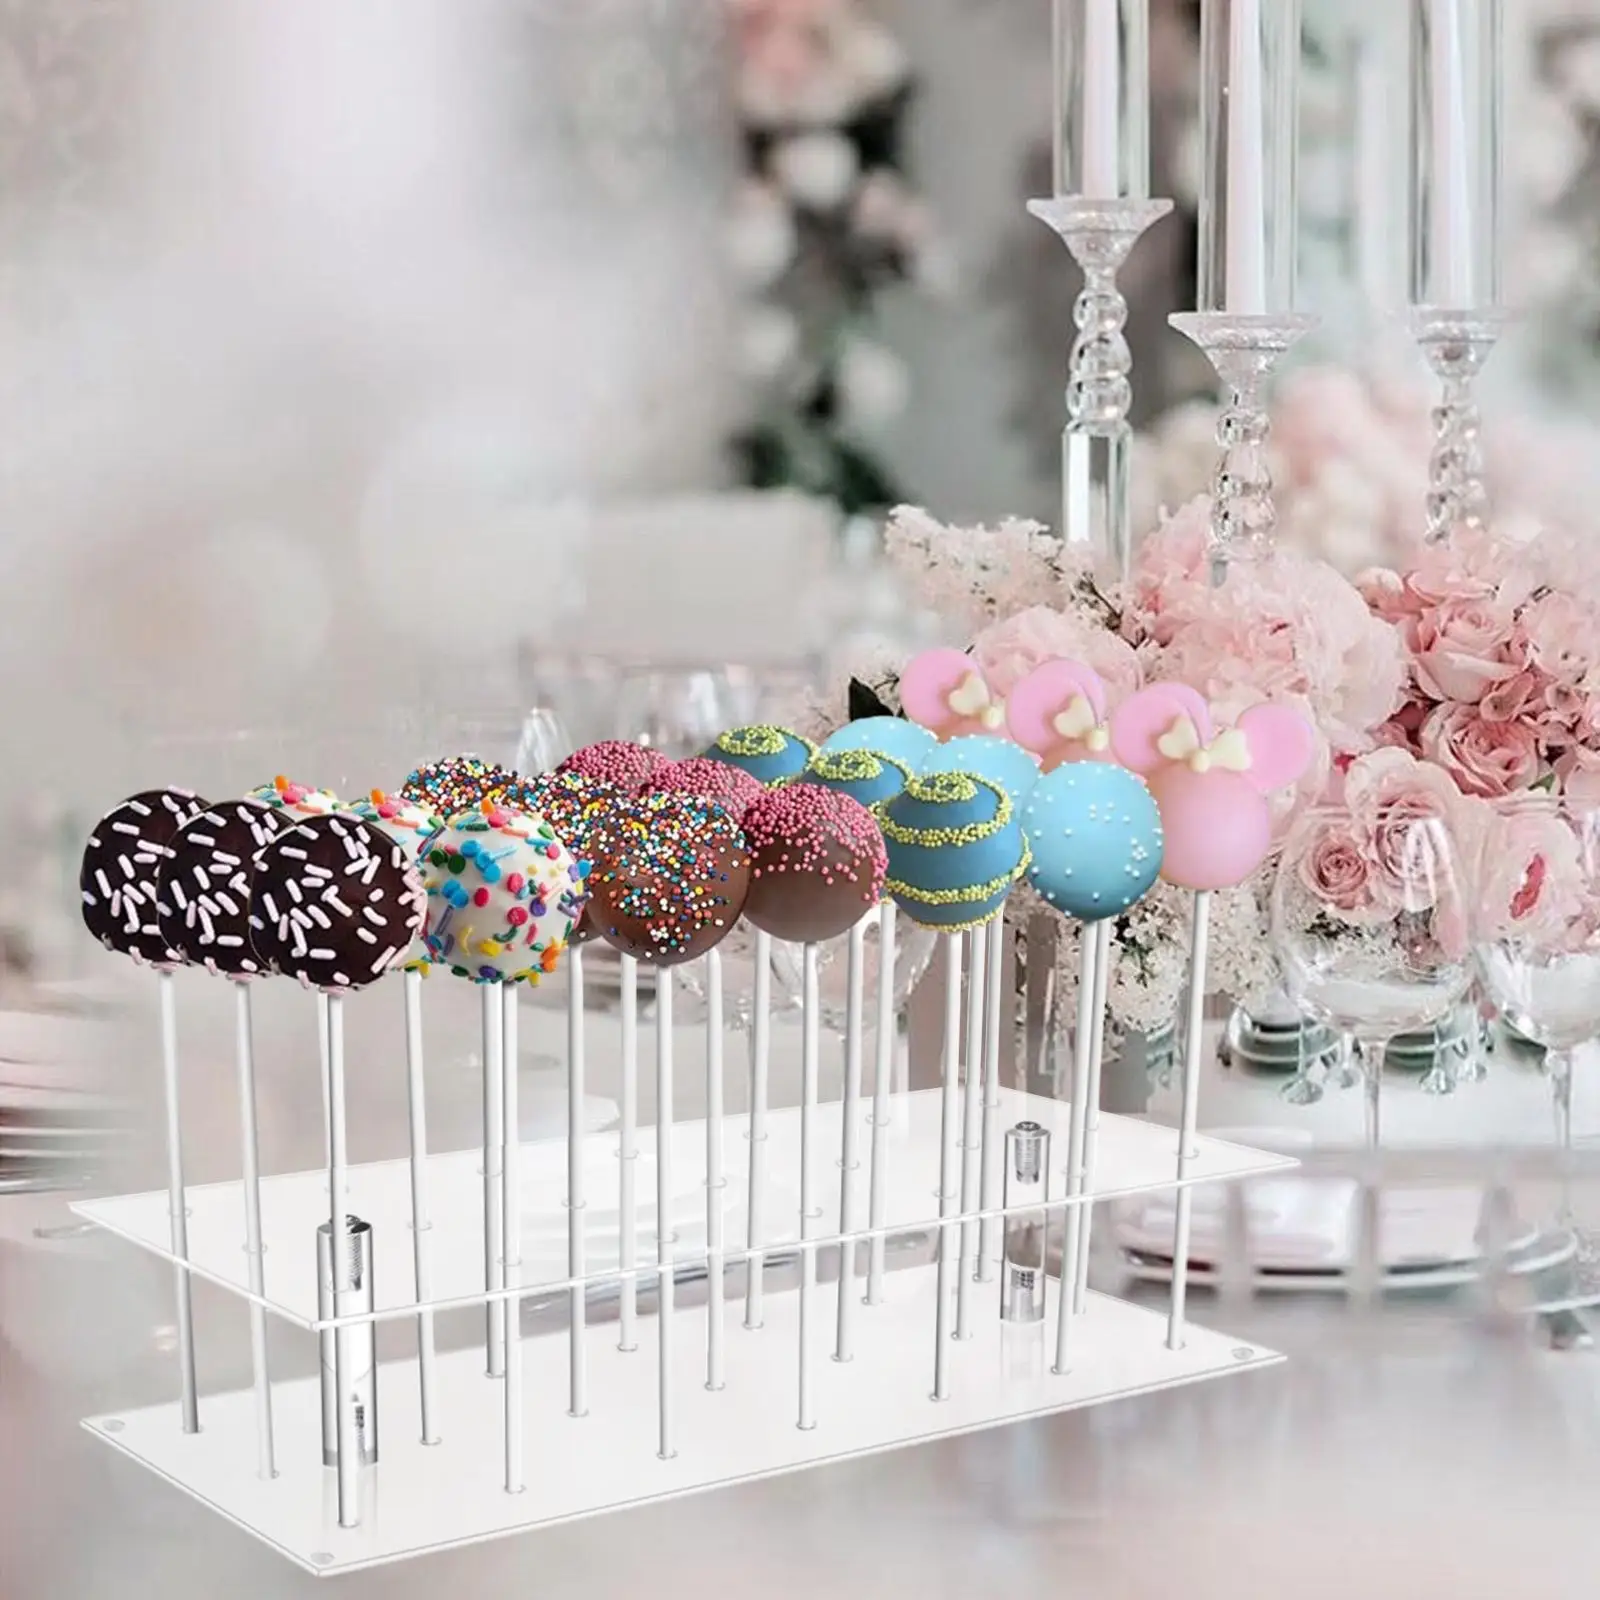 Lollipop Stand Double Layer Rectangle Display Stand Cake Holder for Anniversaries Parties Dessert Table Weddings Birthday